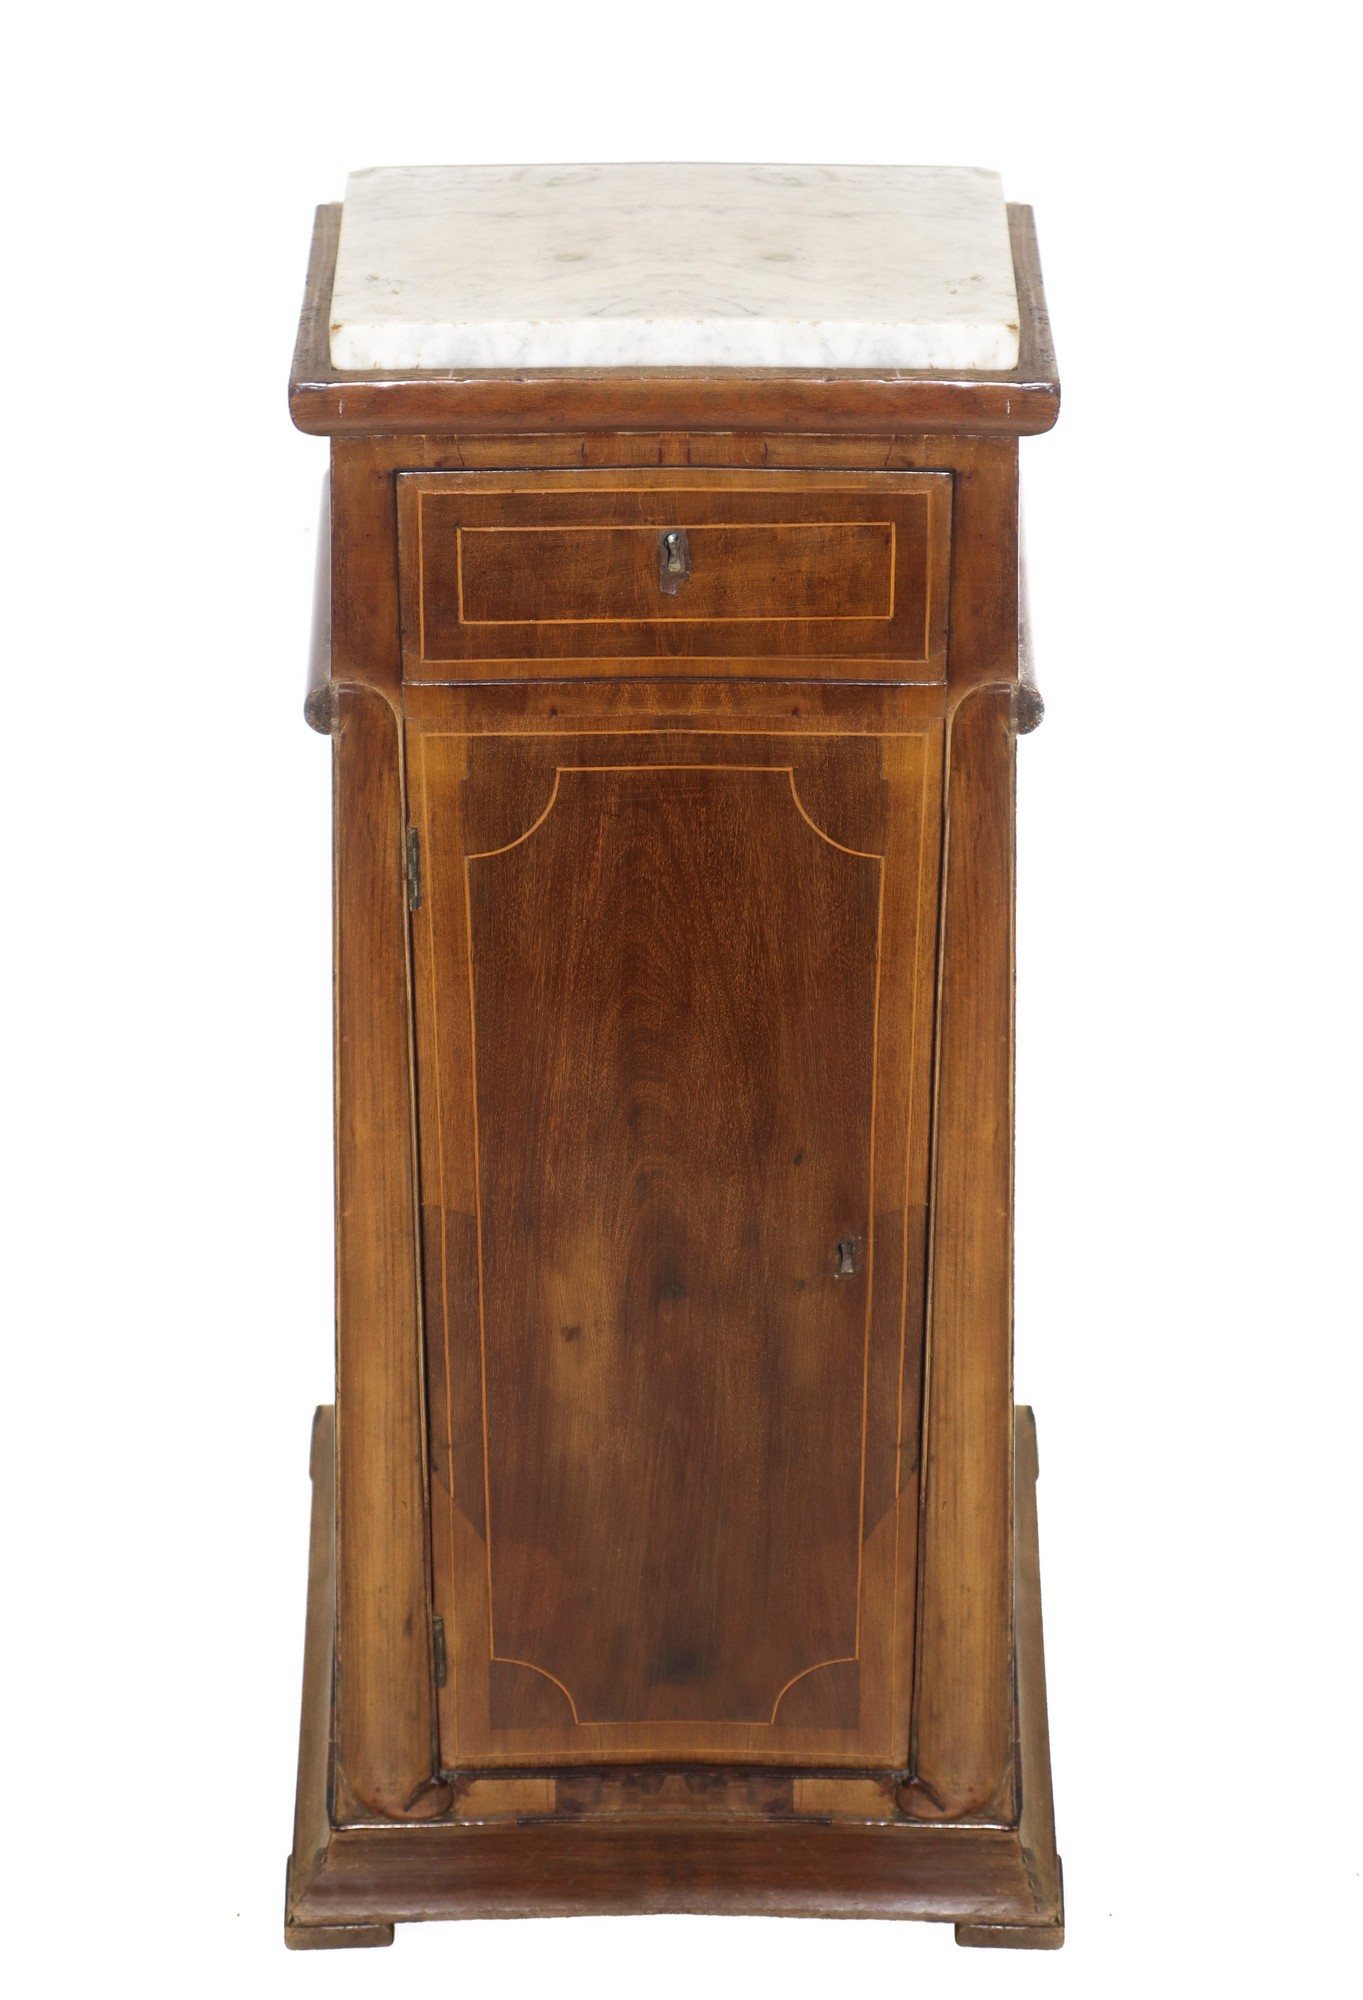 Pyramidal trunk center bedside table in walnut wood, Sicily 19th century - Image 5 of 5